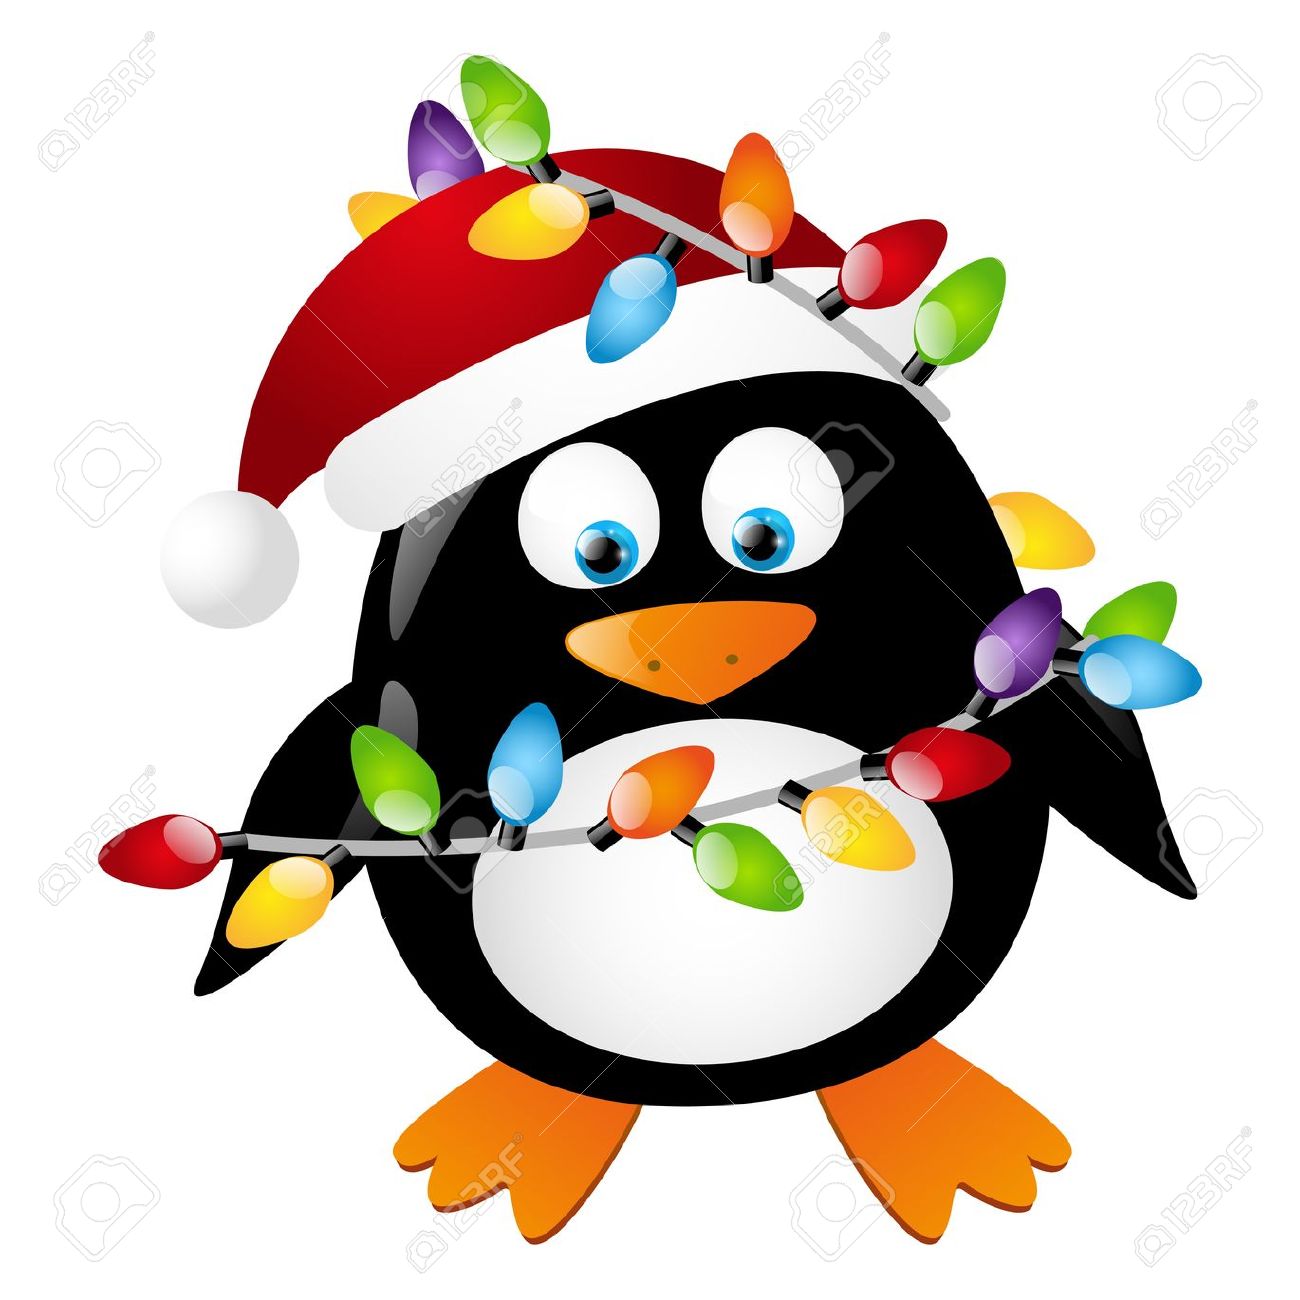 Penguin With Christmas Light Bulbs Royalty Free Cliparts, Vectors .